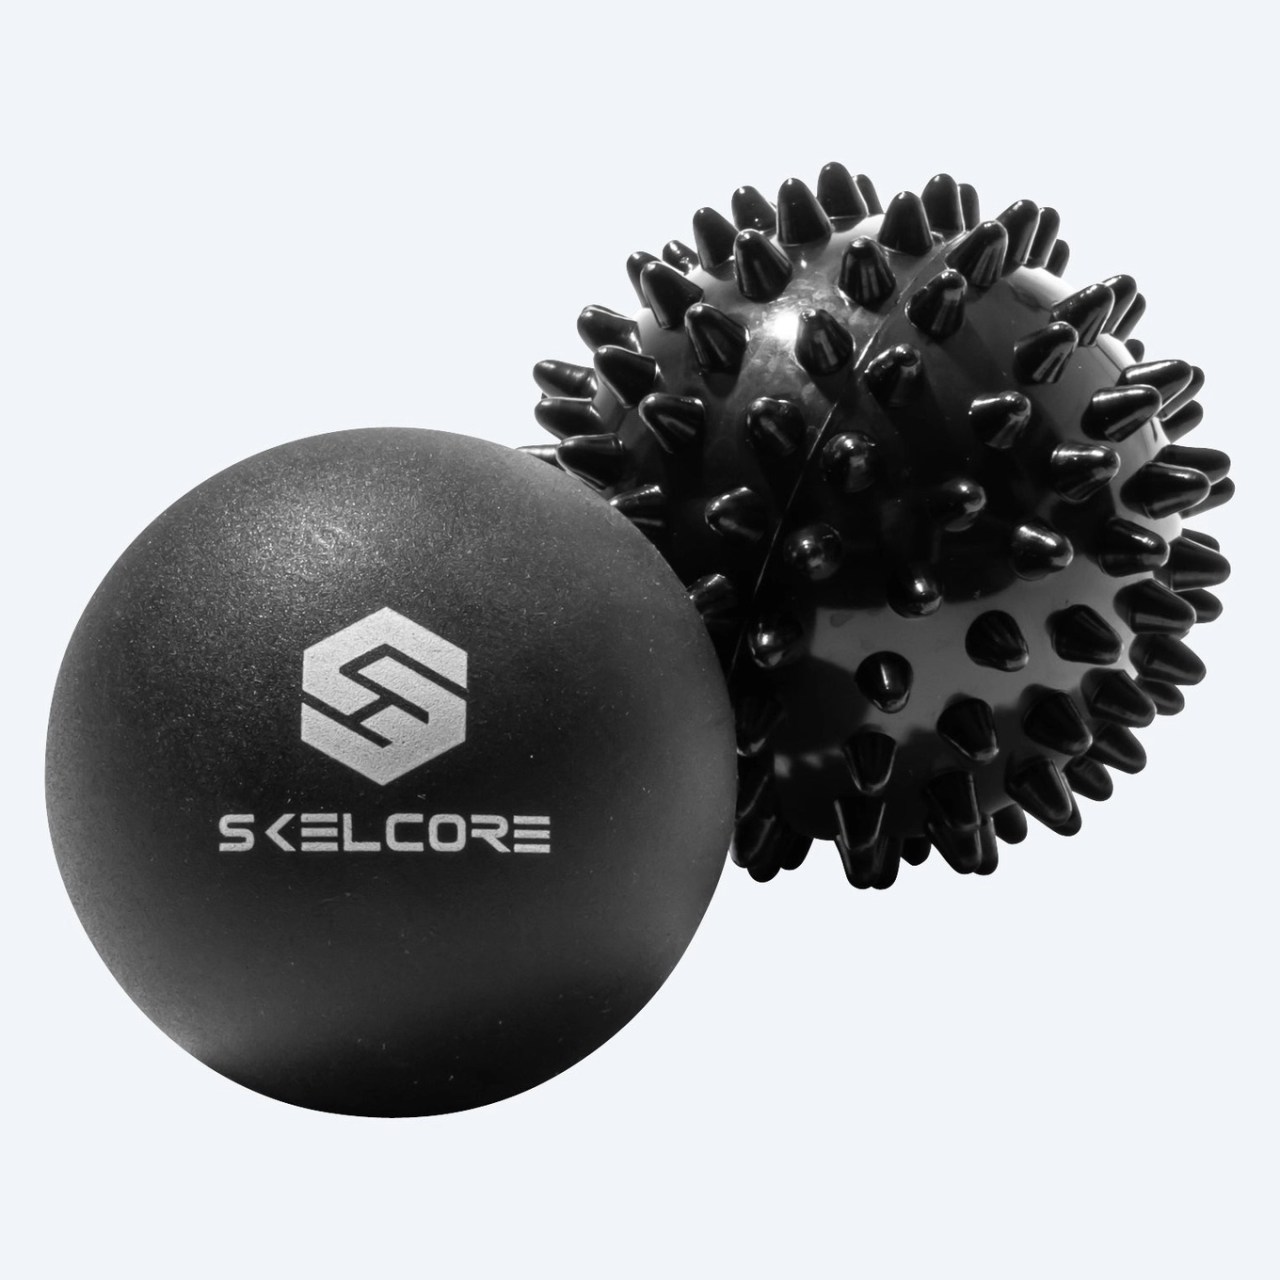 Skelcore Lacrosse and Spiky Massage Ball 2 Piece Set